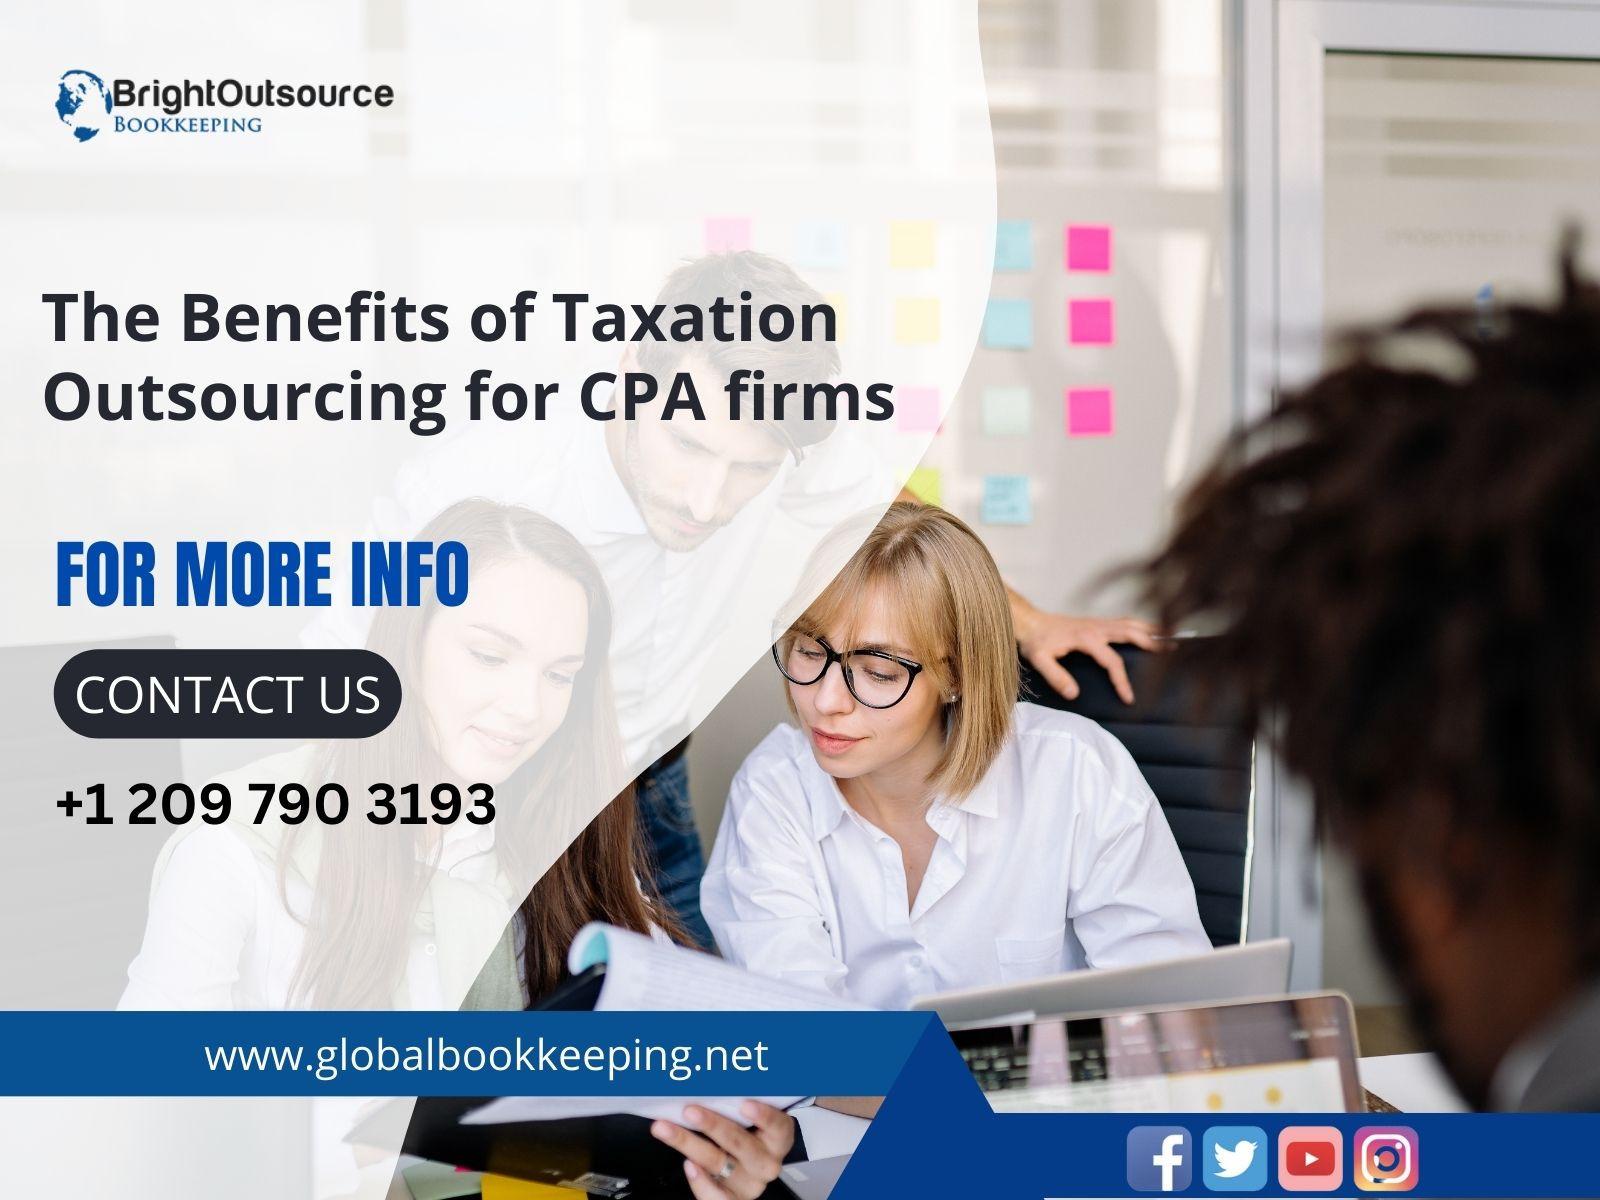 The Benefits of Taxation Outsourcing for CPA firms